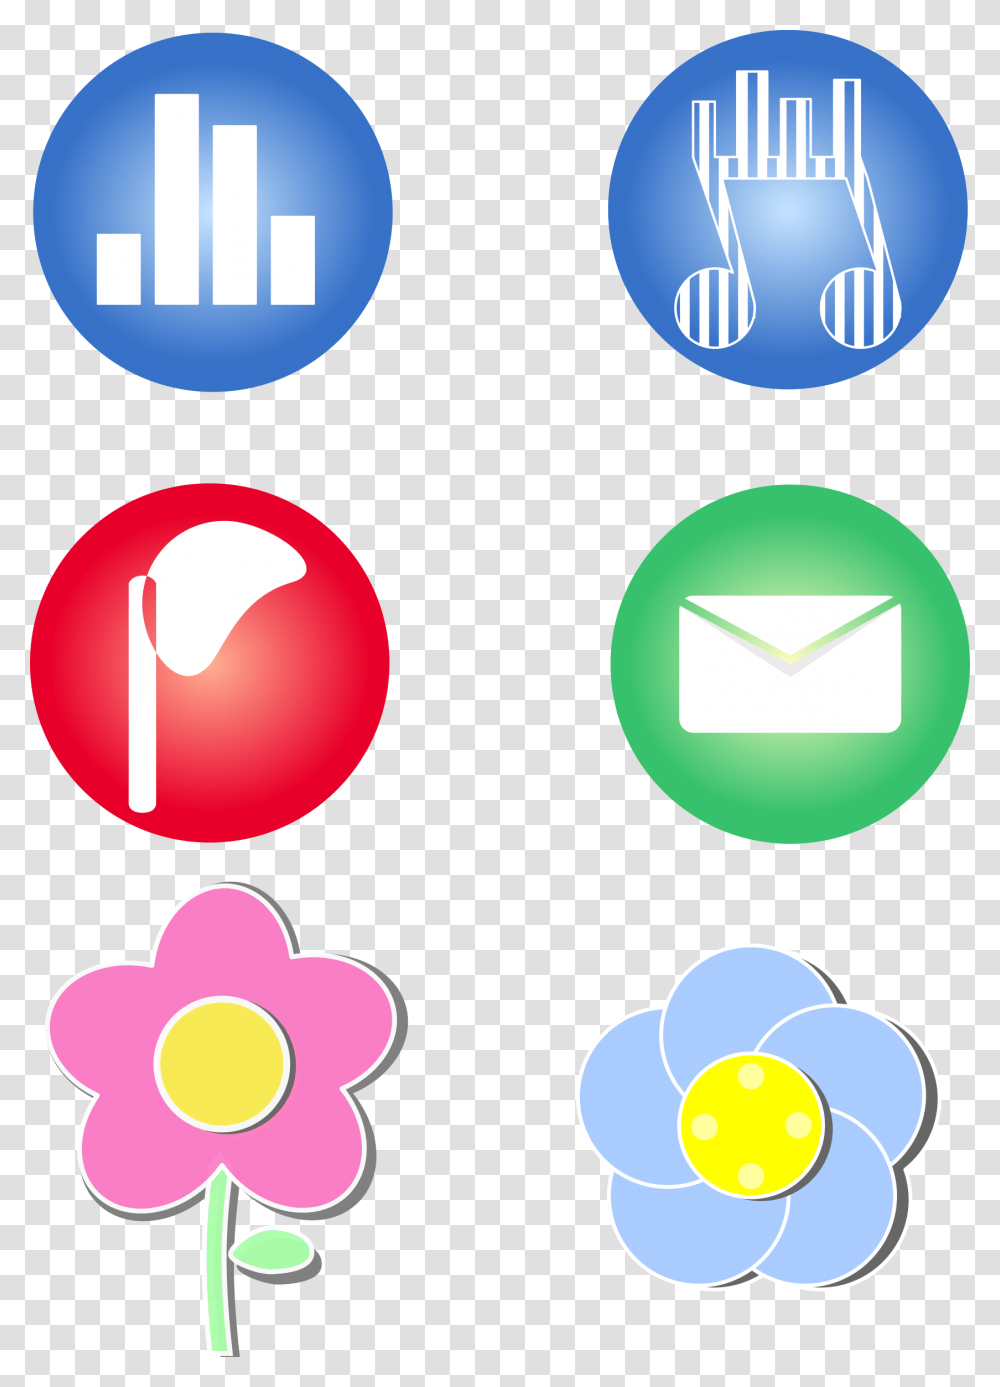 Icons For Cellphone Clip Arts Icon, Light, Flare, Traffic Light Transparent Png